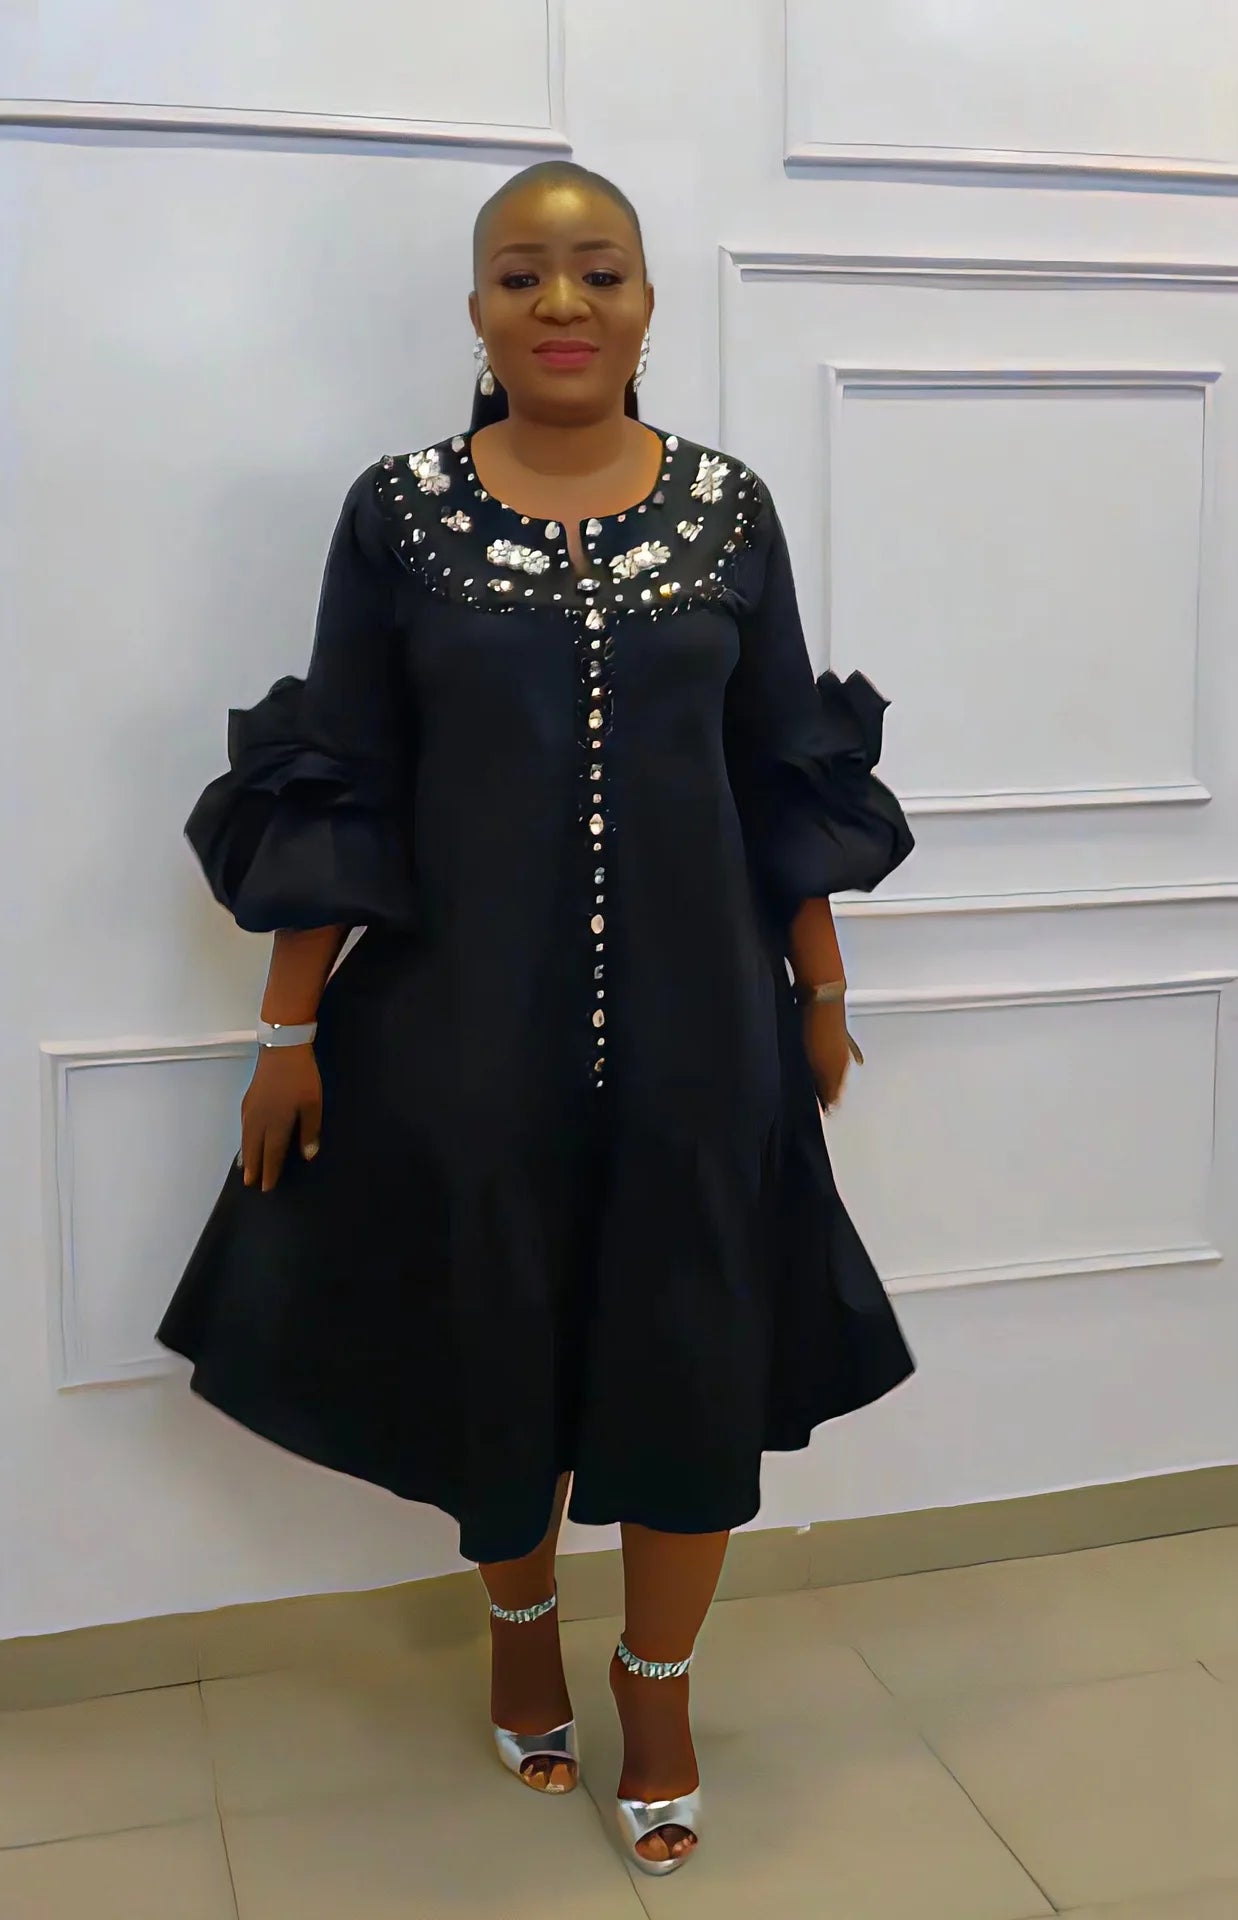 Chic Plus Size African Diamond Dress: Stylish Loose Fit, Elegant Puff Sleeves - Flexi Africa - Free POST www.flexiafrica.com